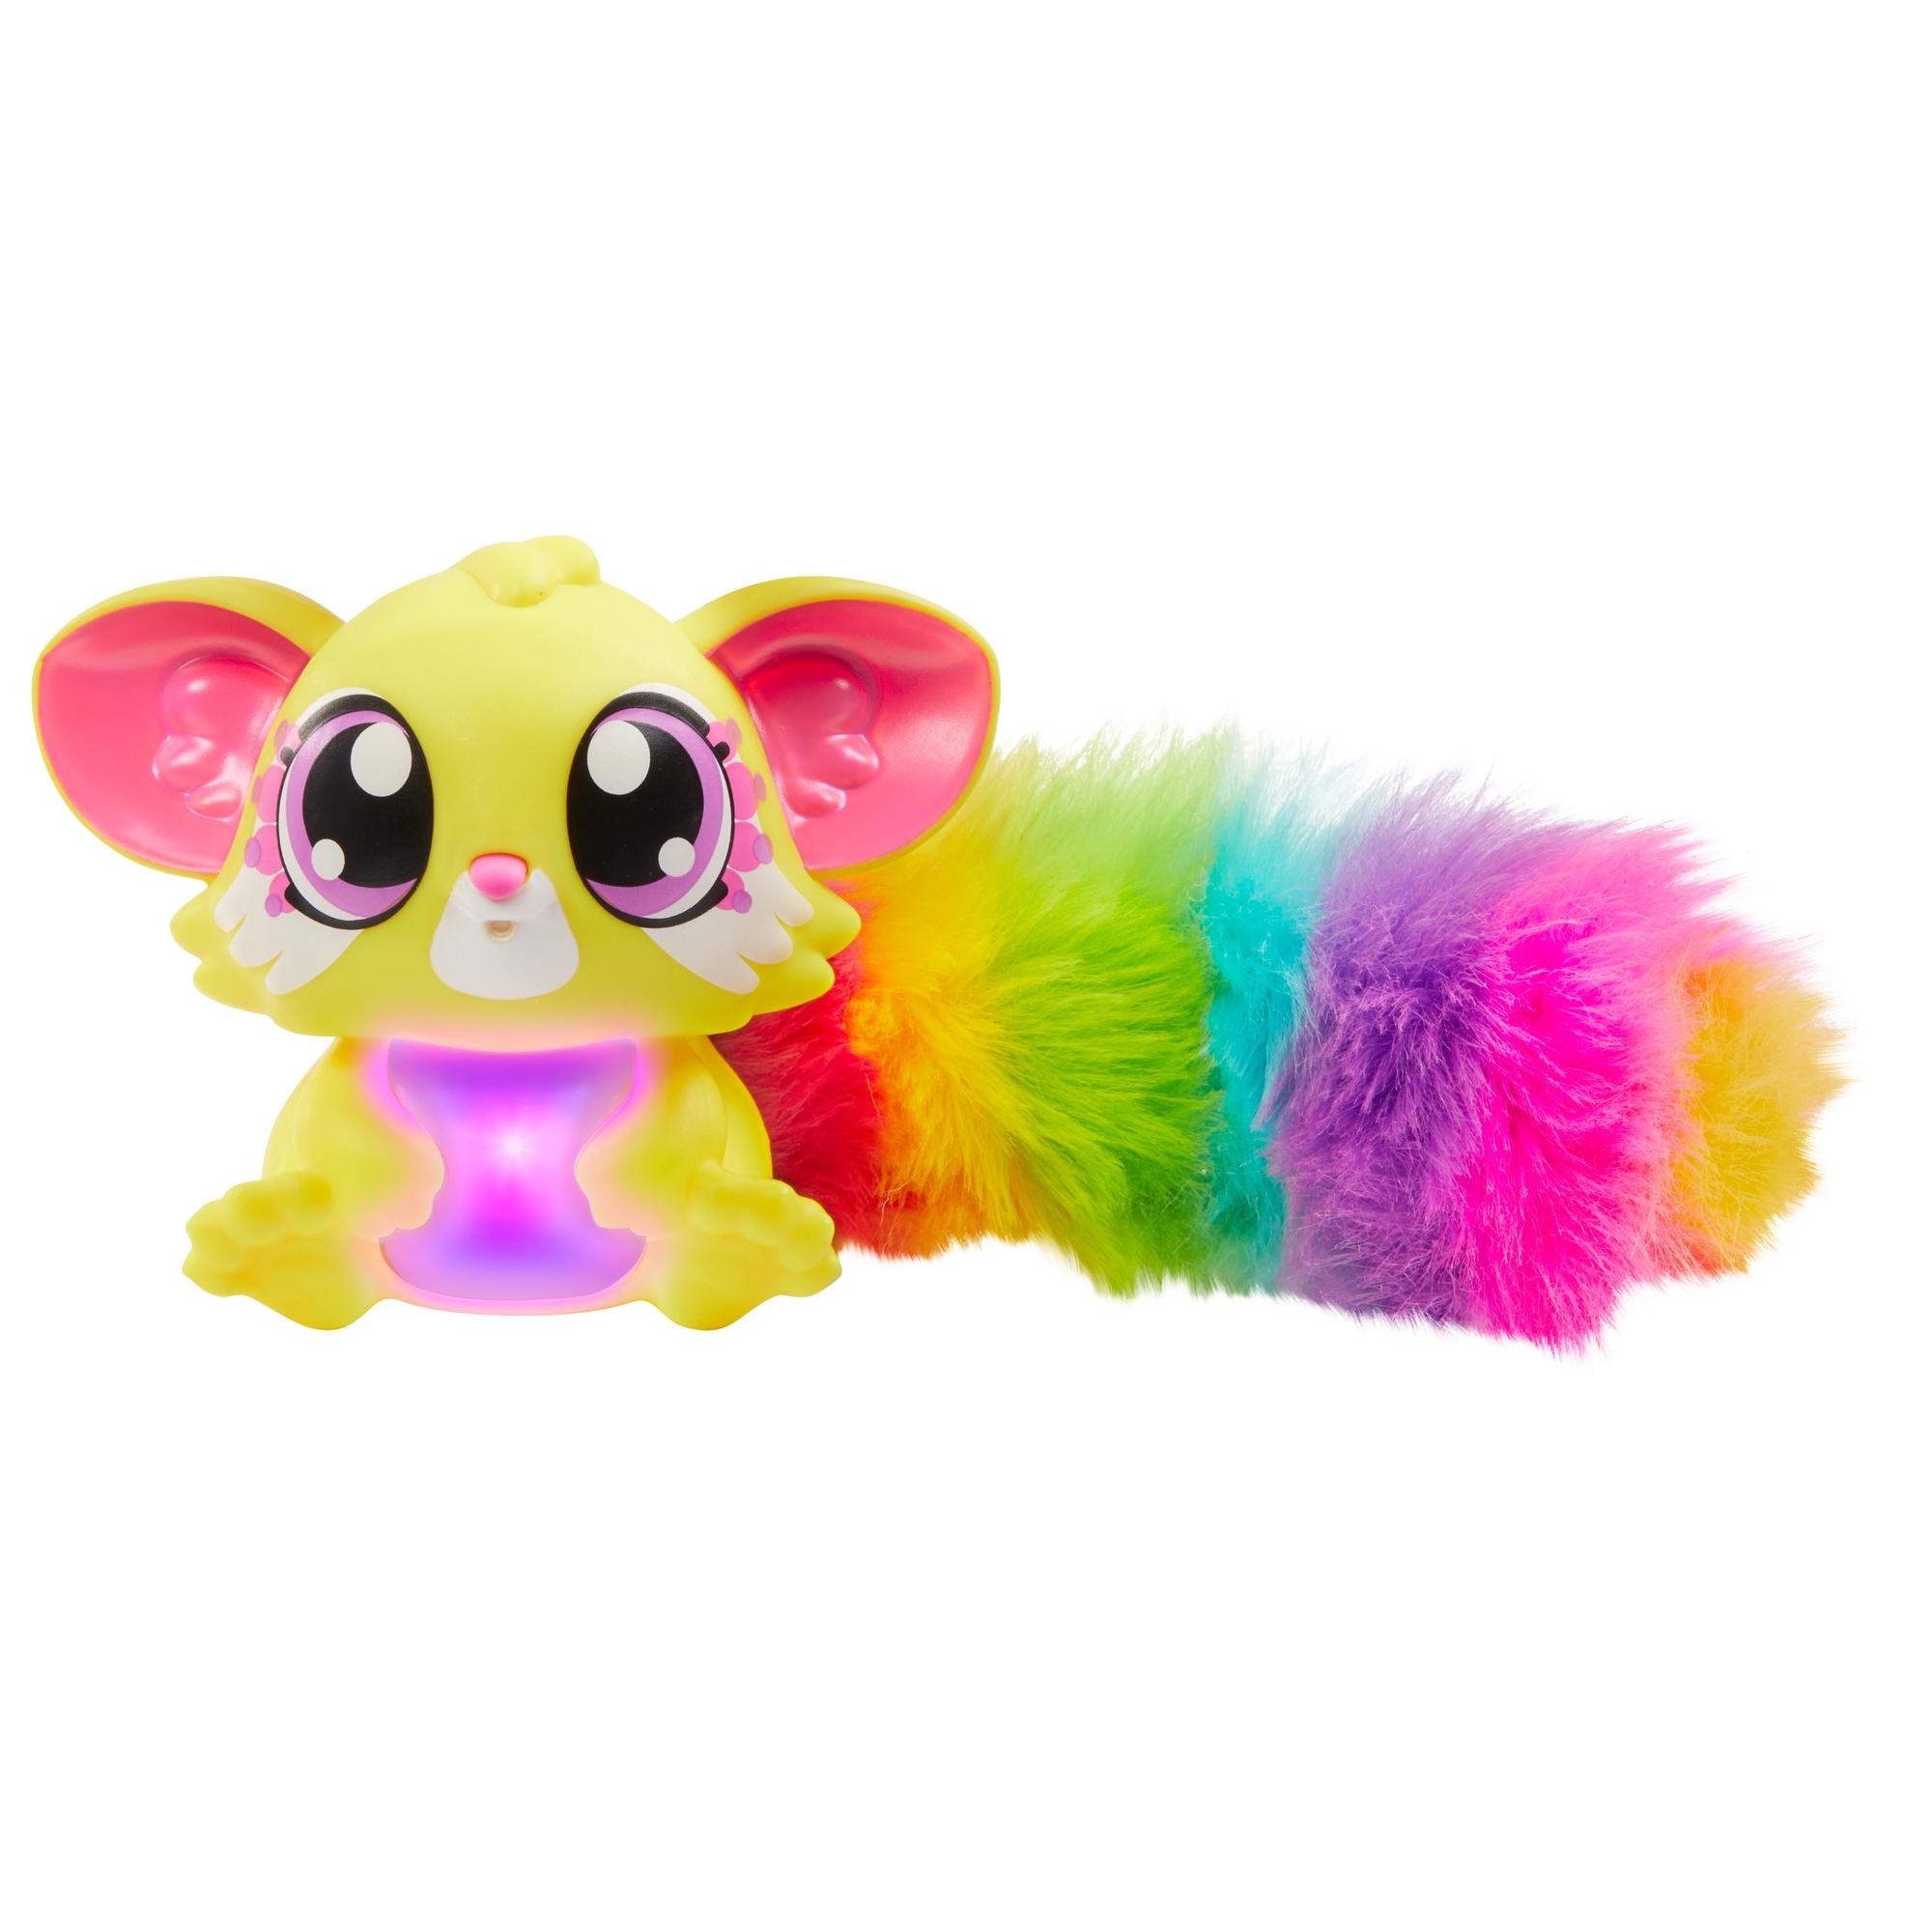 Lil' Gleemerz Babies Interactive Light-Up Figure (Styles May Vary) - image 10 of 18